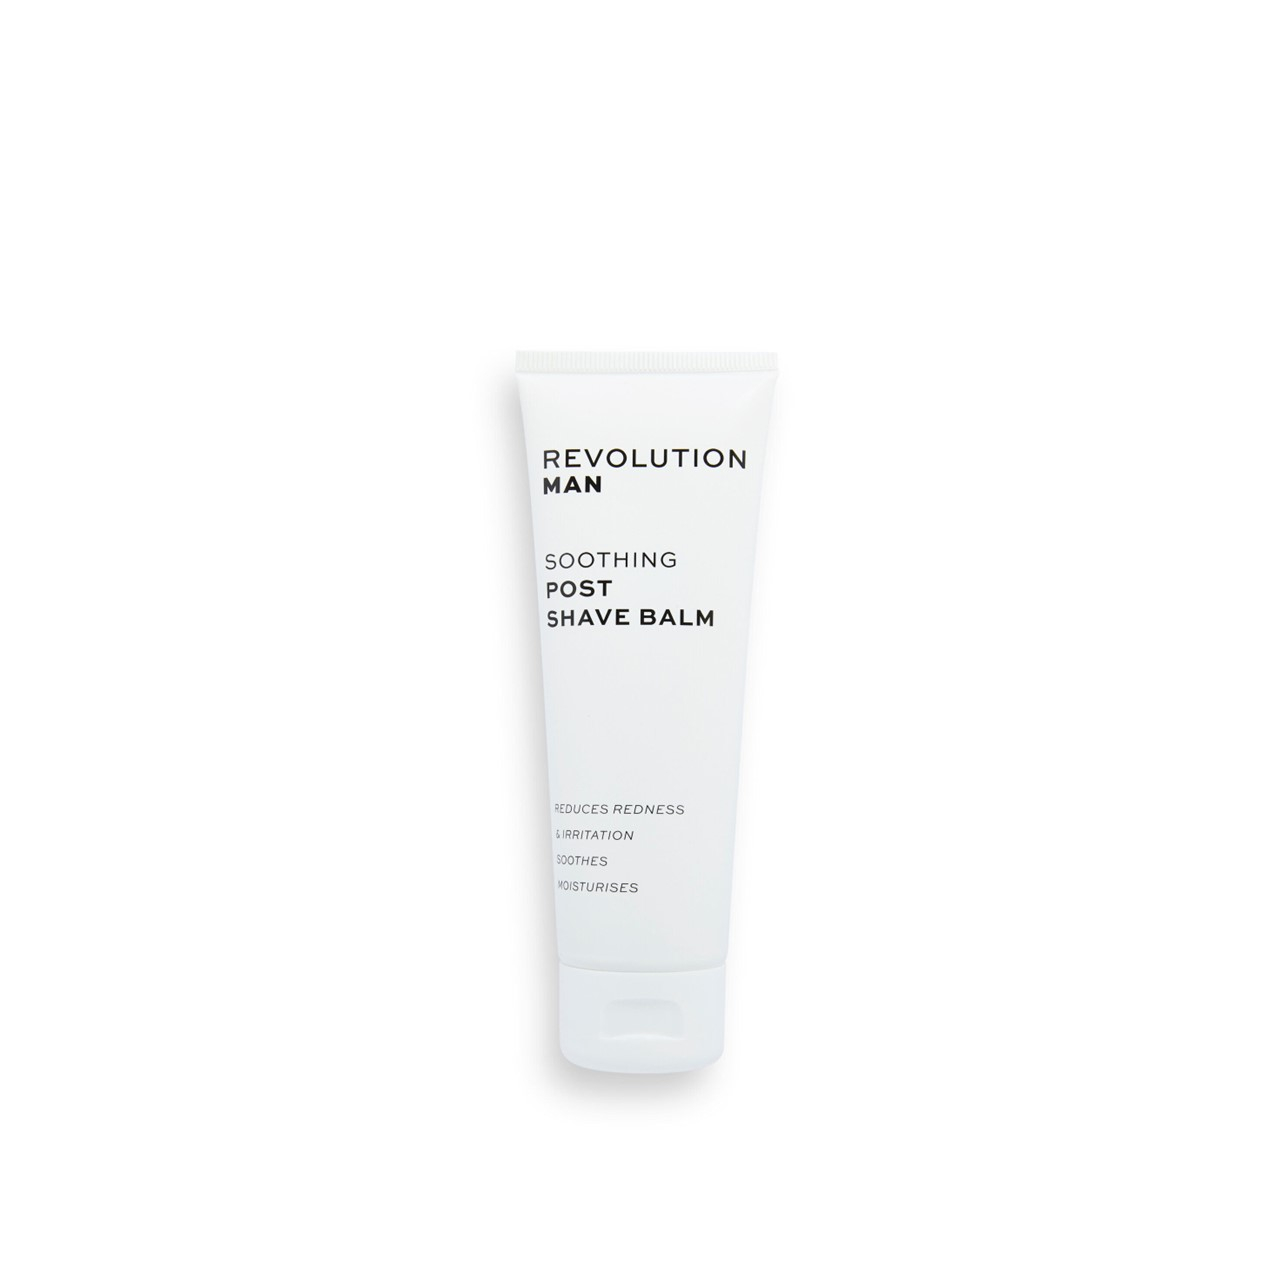 Revolution Man Soothing Post Shave Balm 75ml